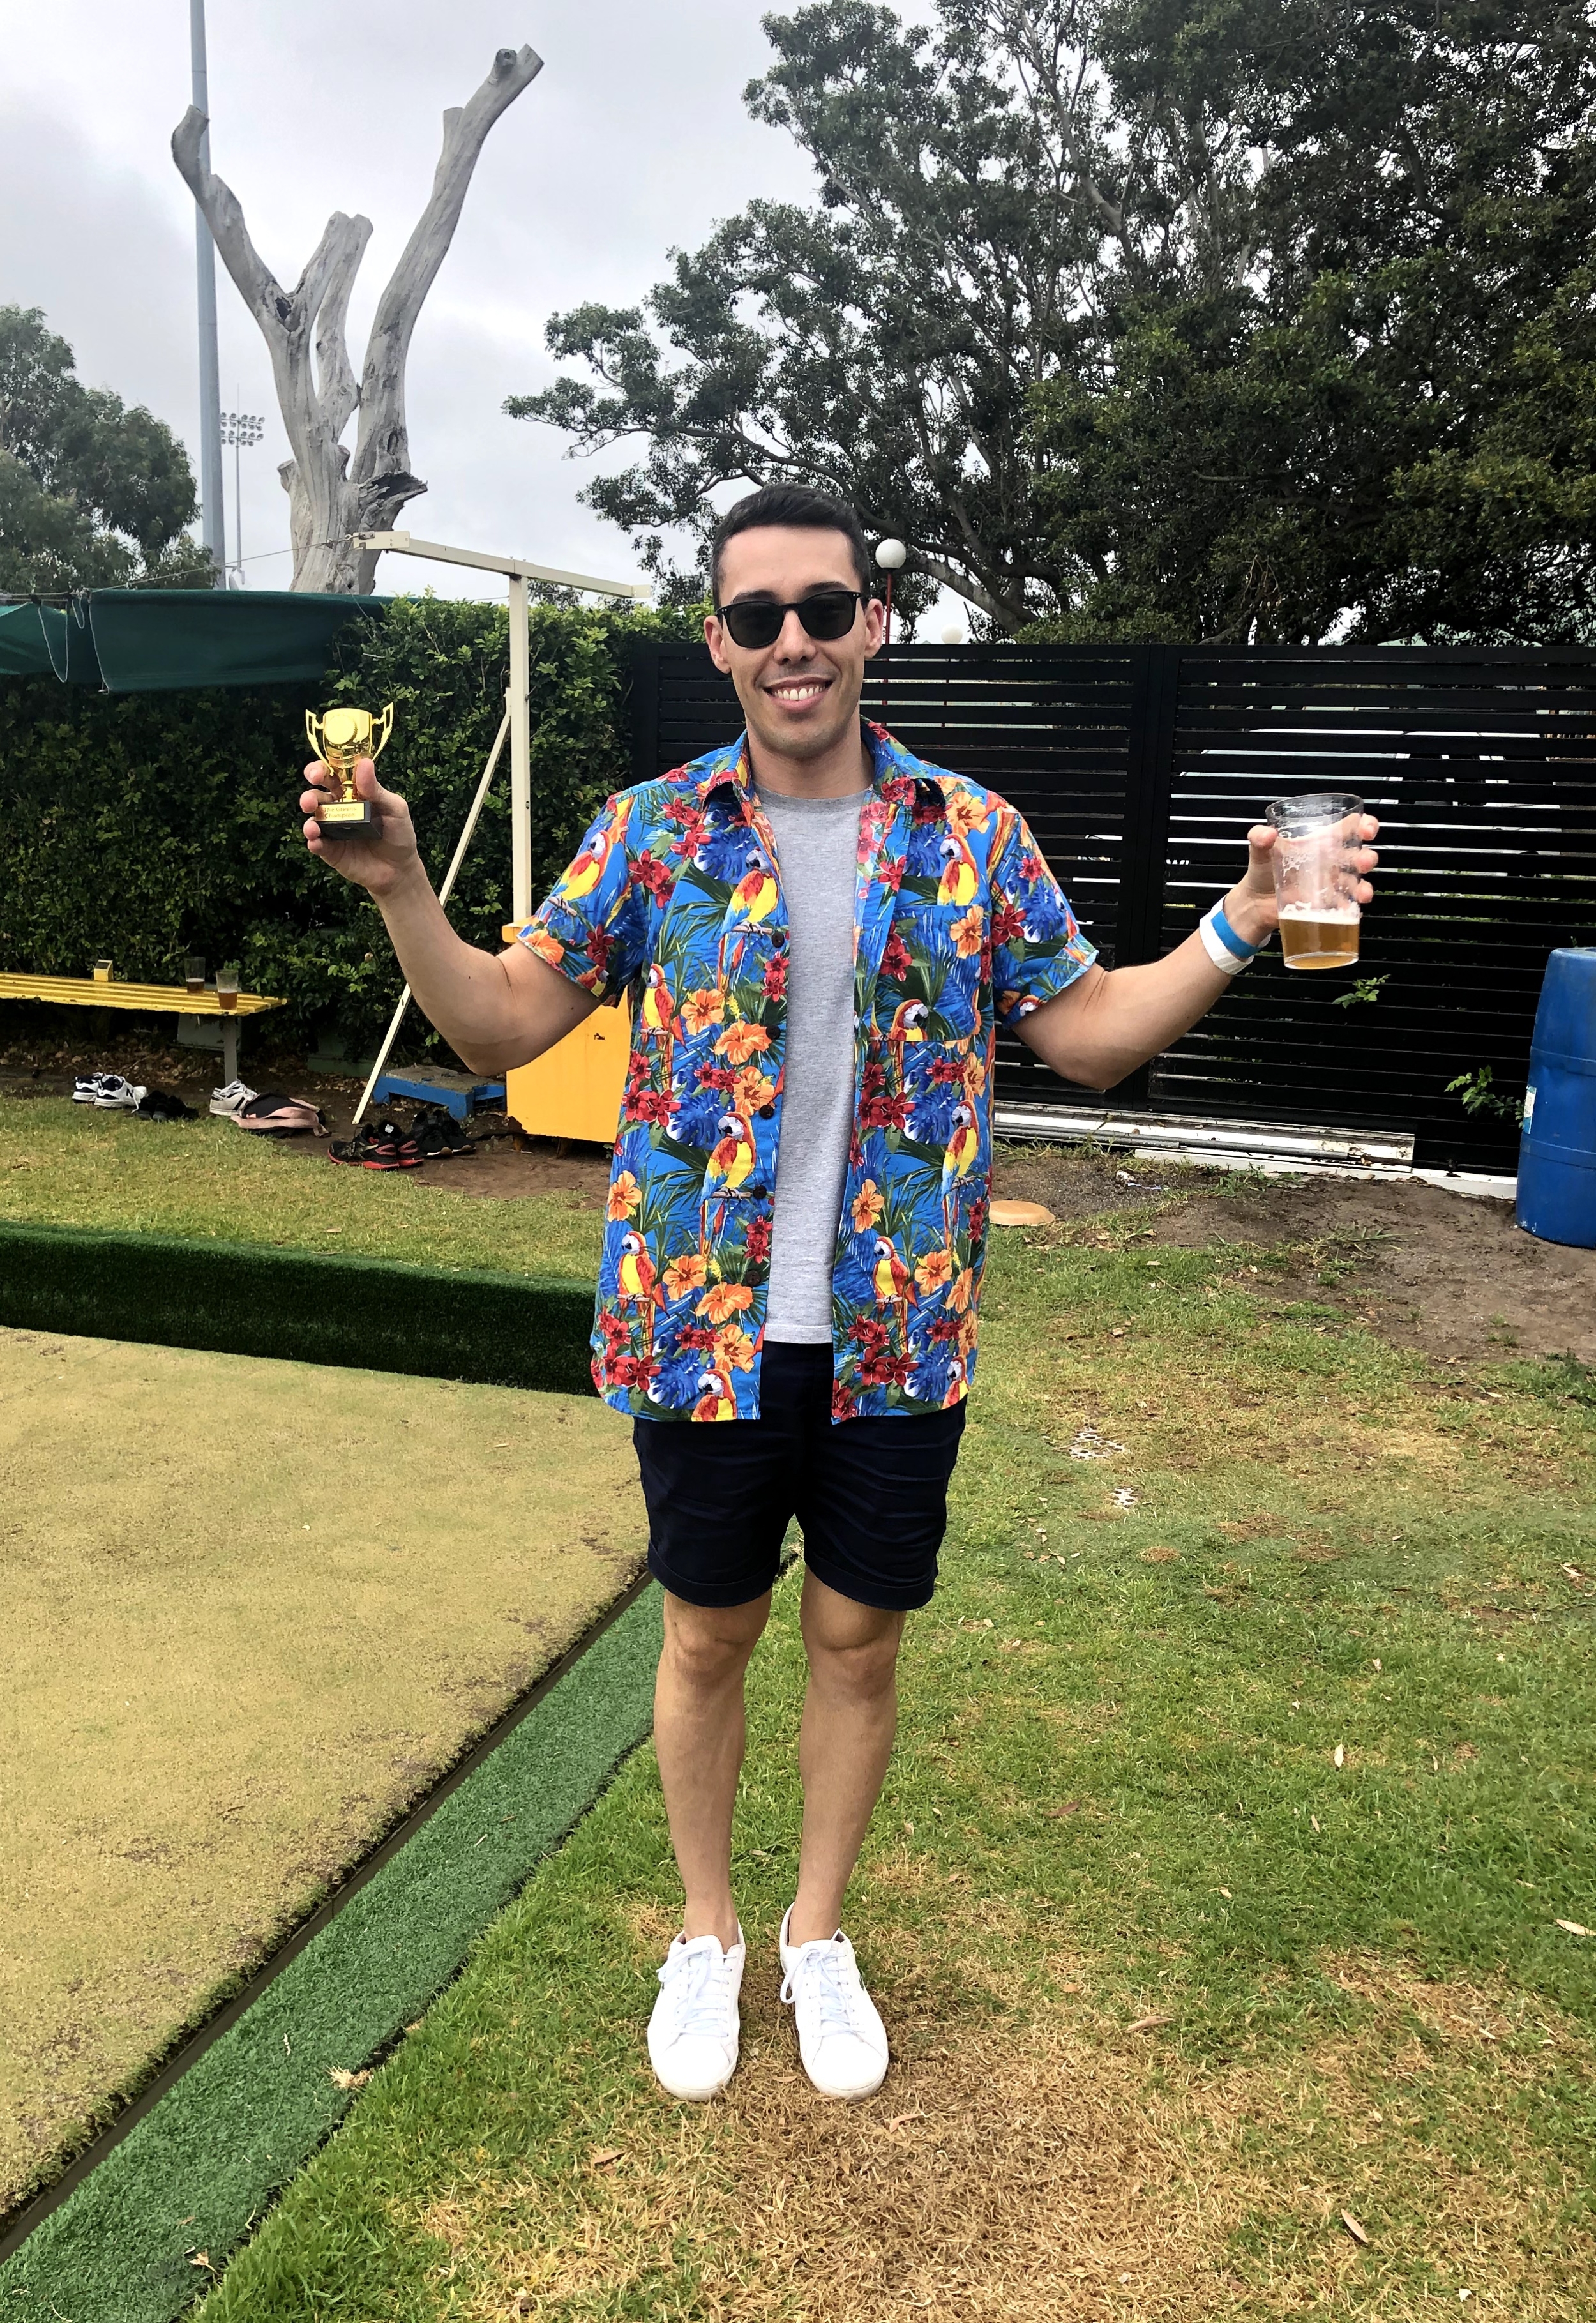 Snapshot of an mx51 employee holding a beer in one hand and a tiny trophy in the othe,r wearing sunglasses and a Hawaiian shirt, standing on the grass at a lawn bowls event.